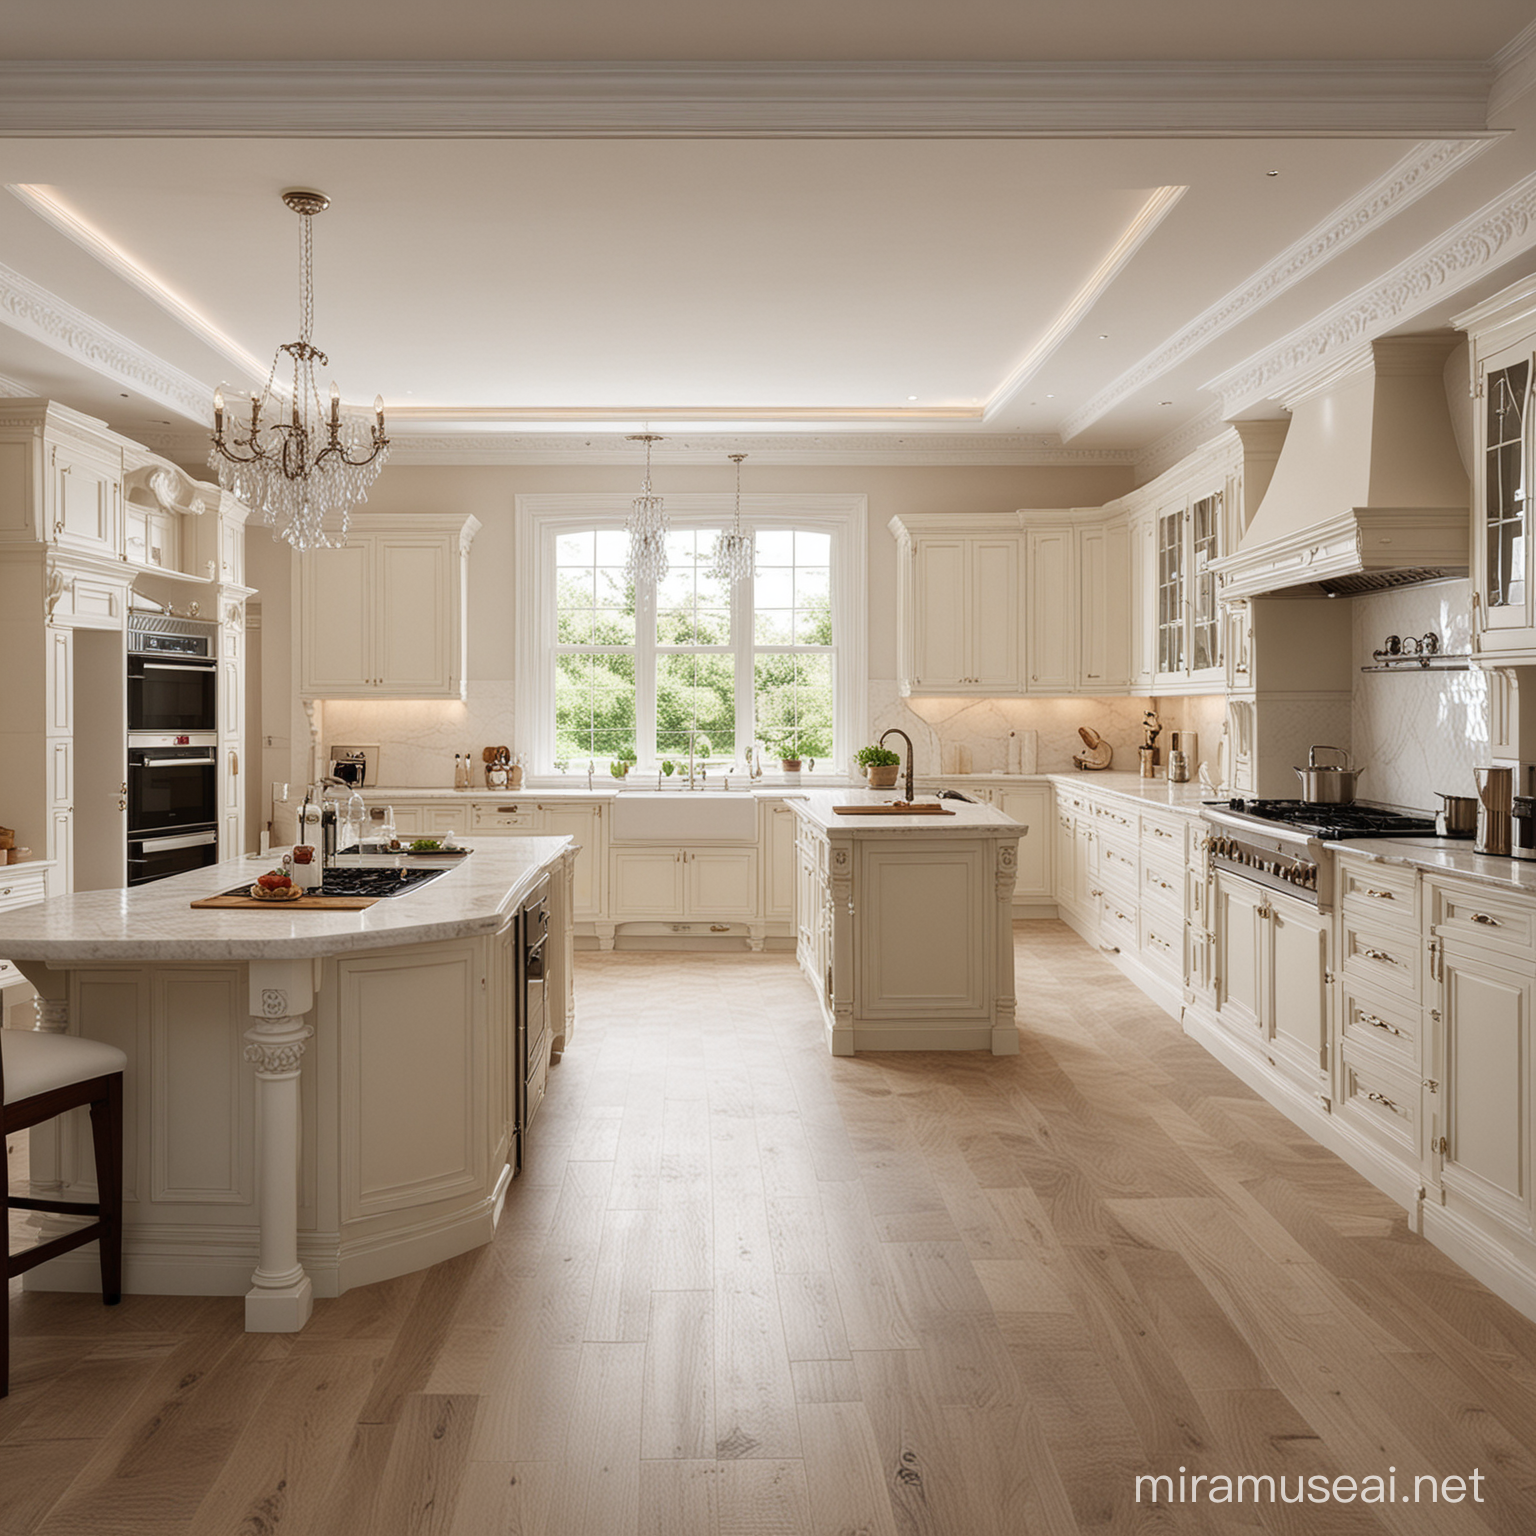 Luxurious Classic Kitchen Interior with Vintage Charm